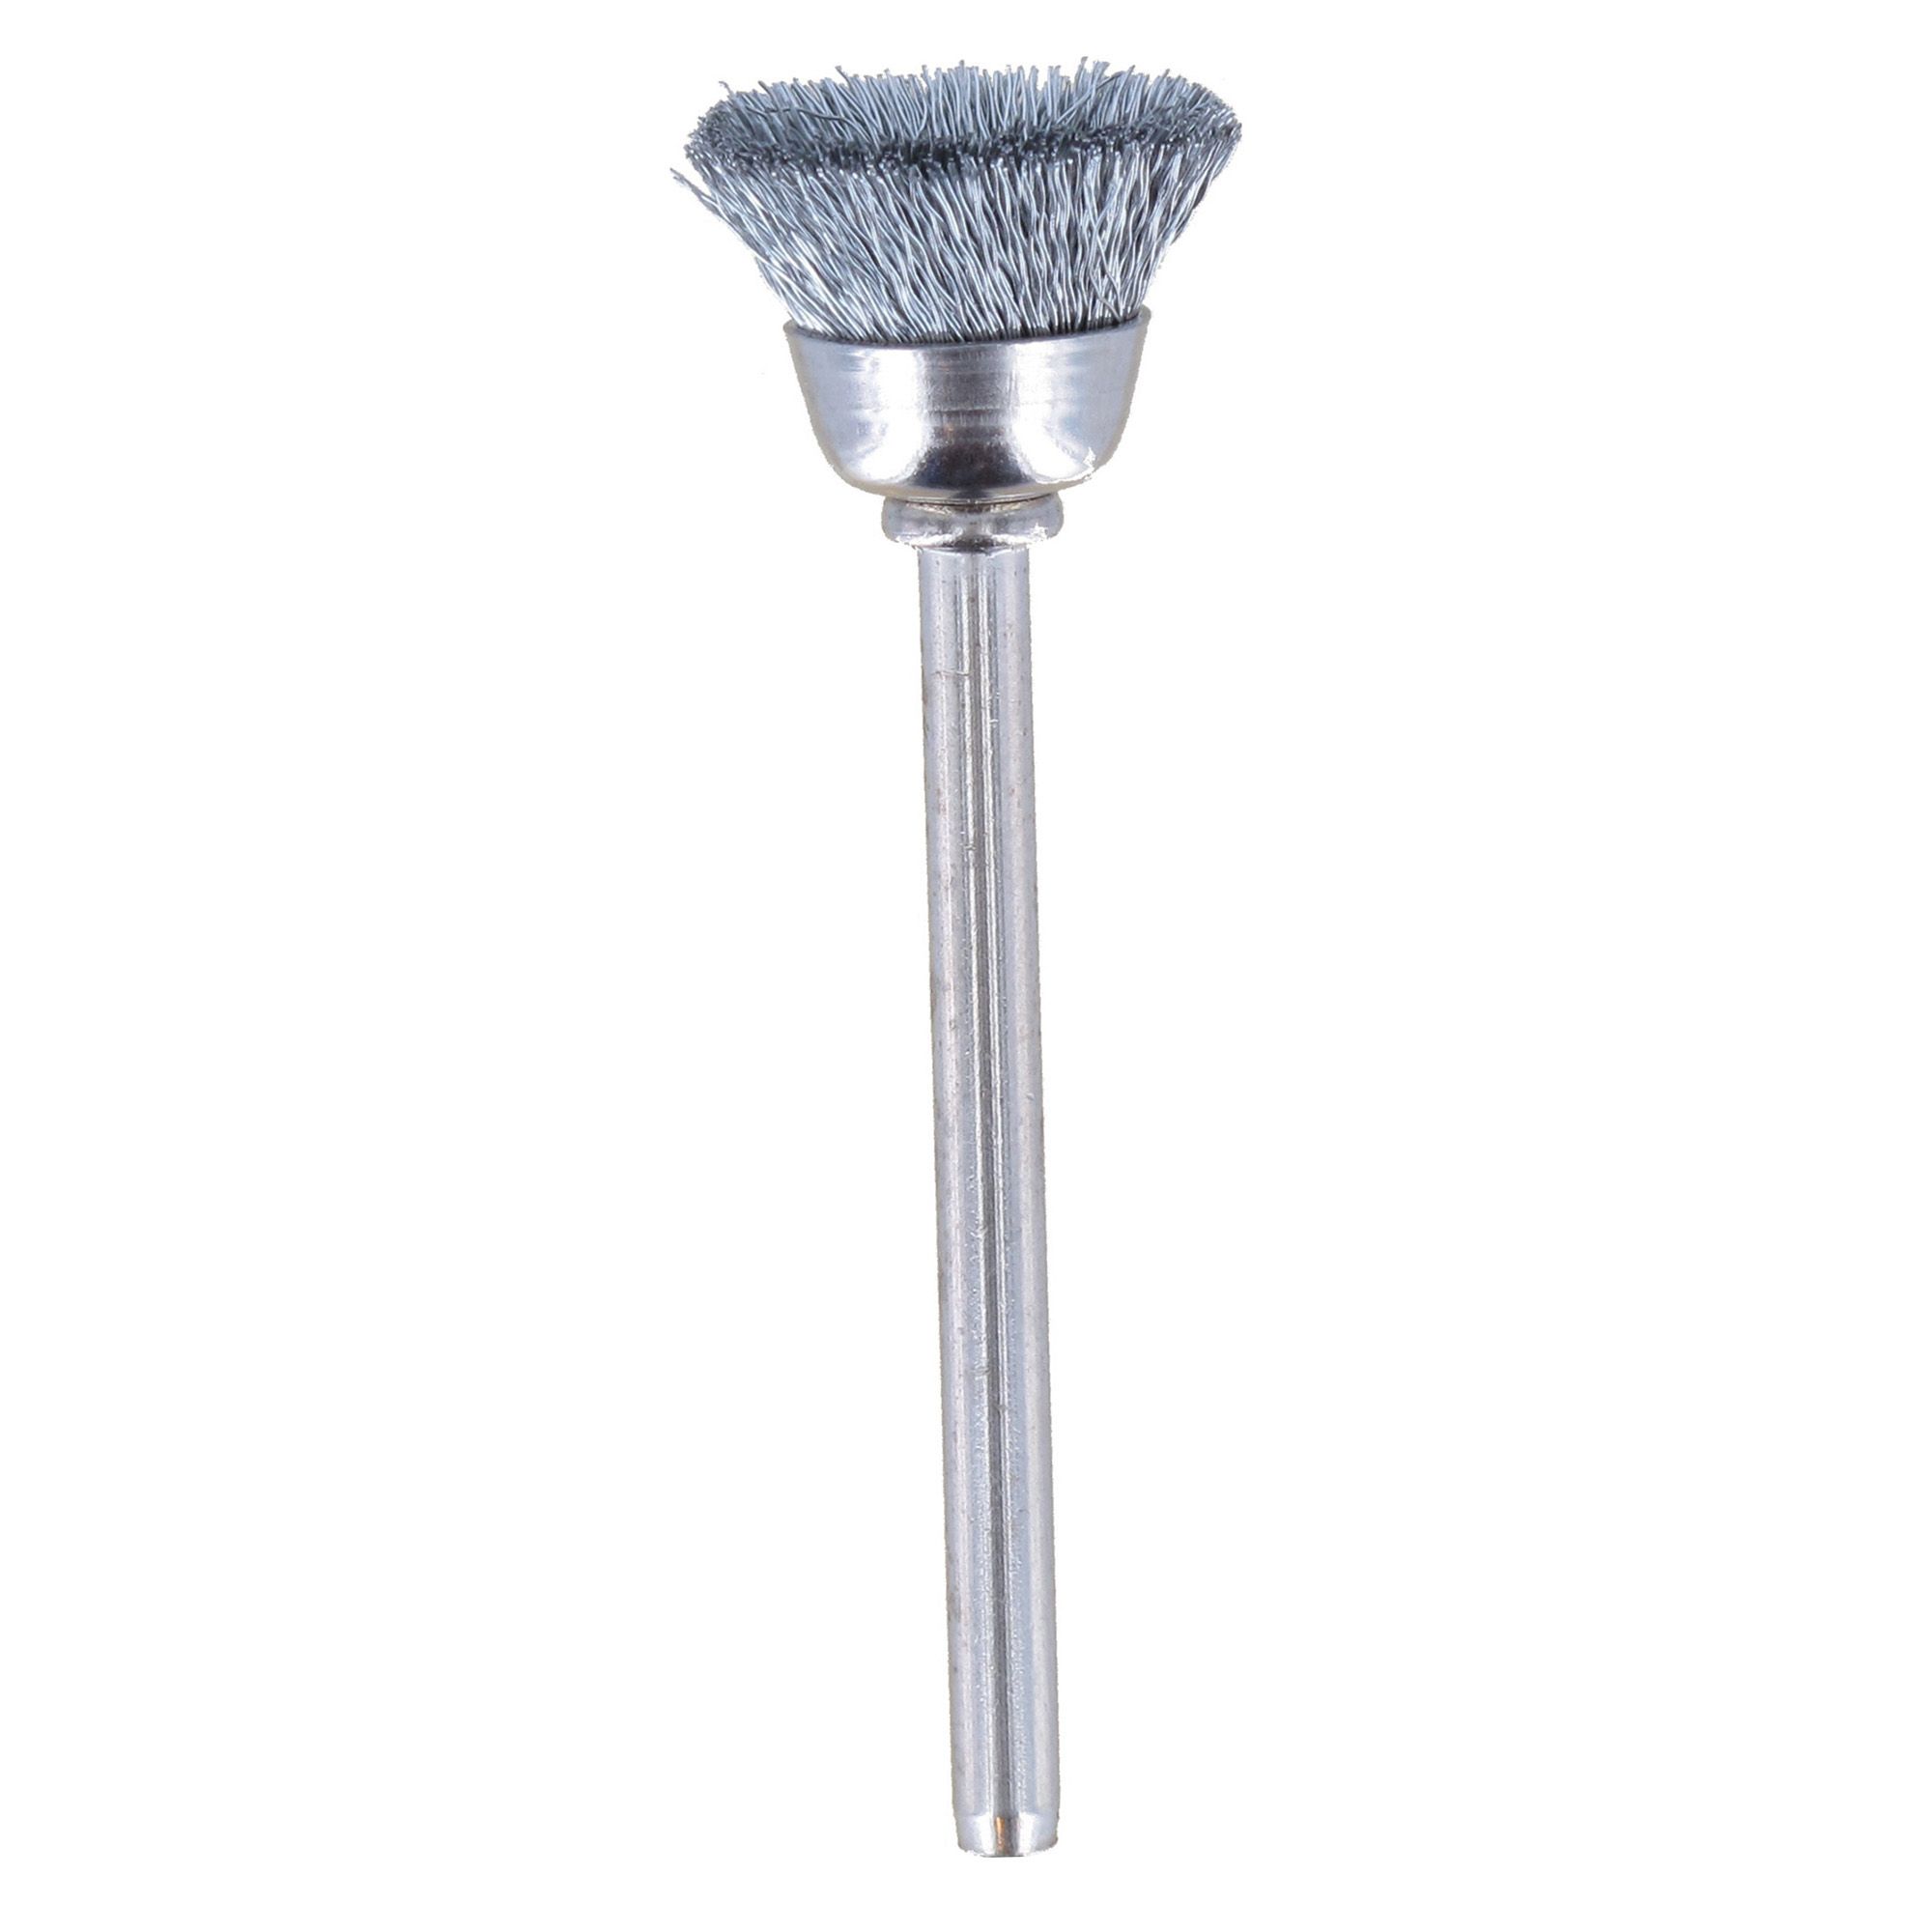 Dremel Carbon steel Cup brush (Dia)13mm, Pack of 2